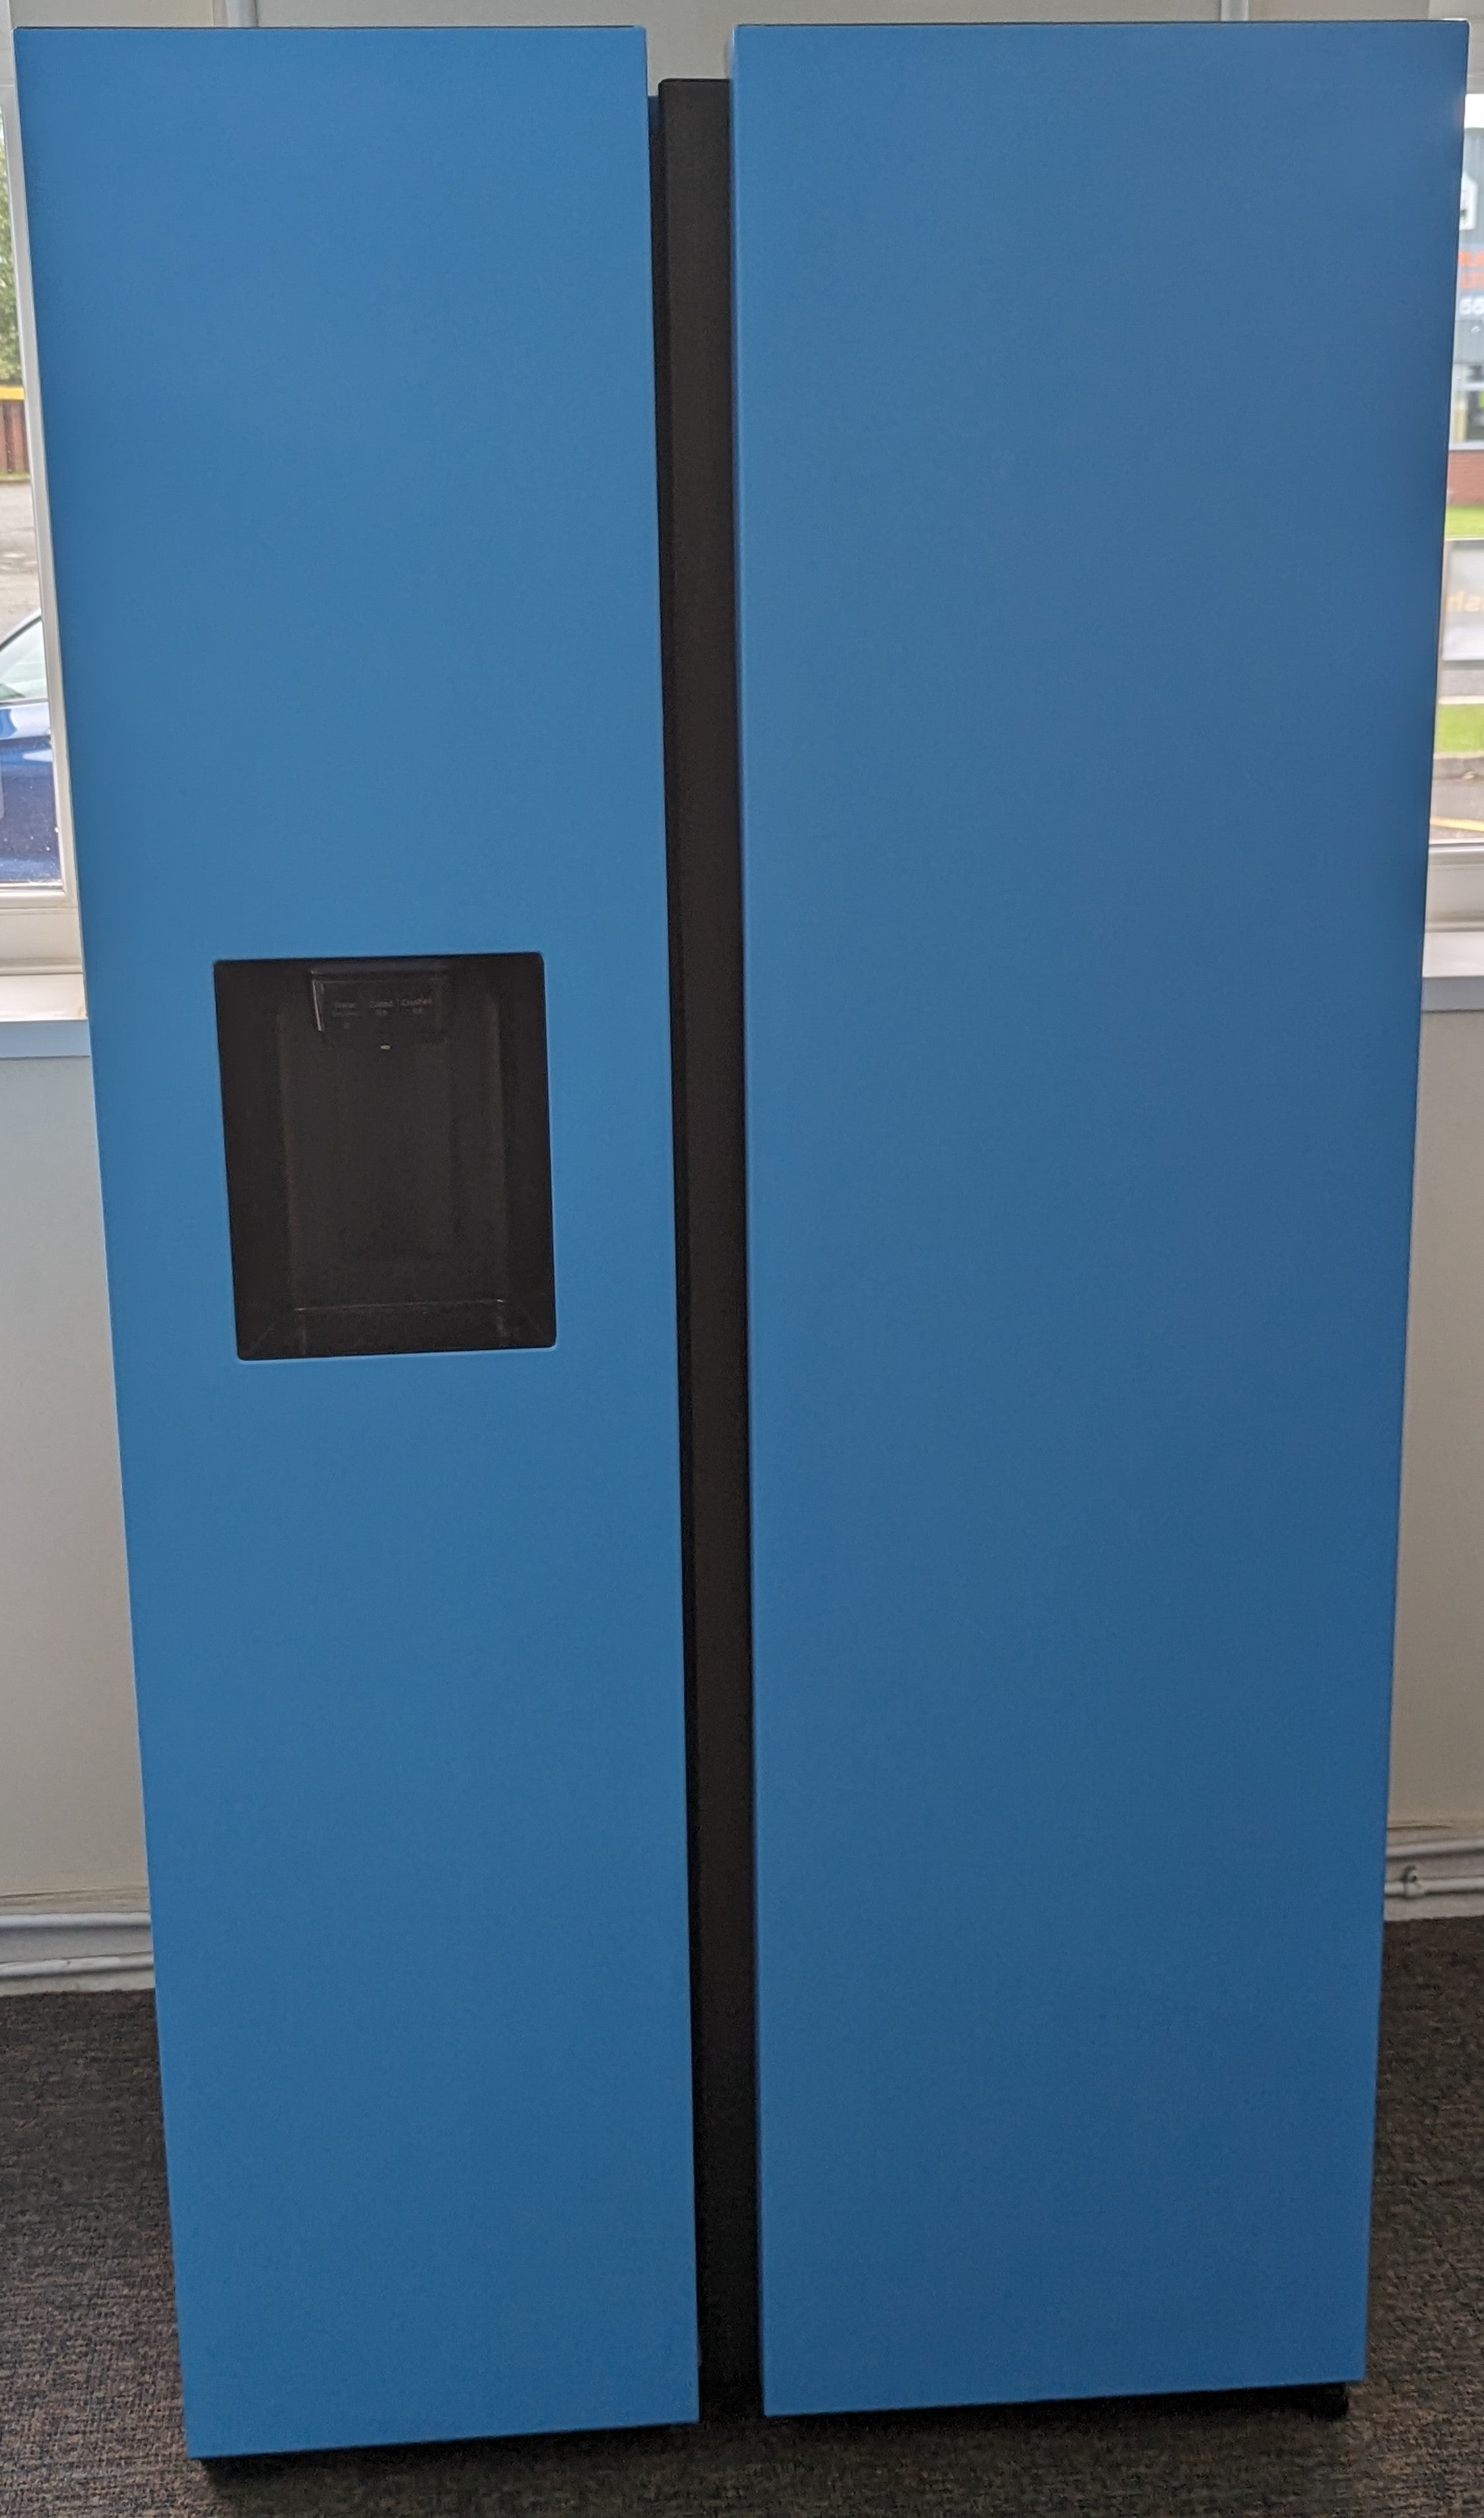 Samsung RS68A8820 Fridge Freezer American Plumbed Ice & Water Electric Blue